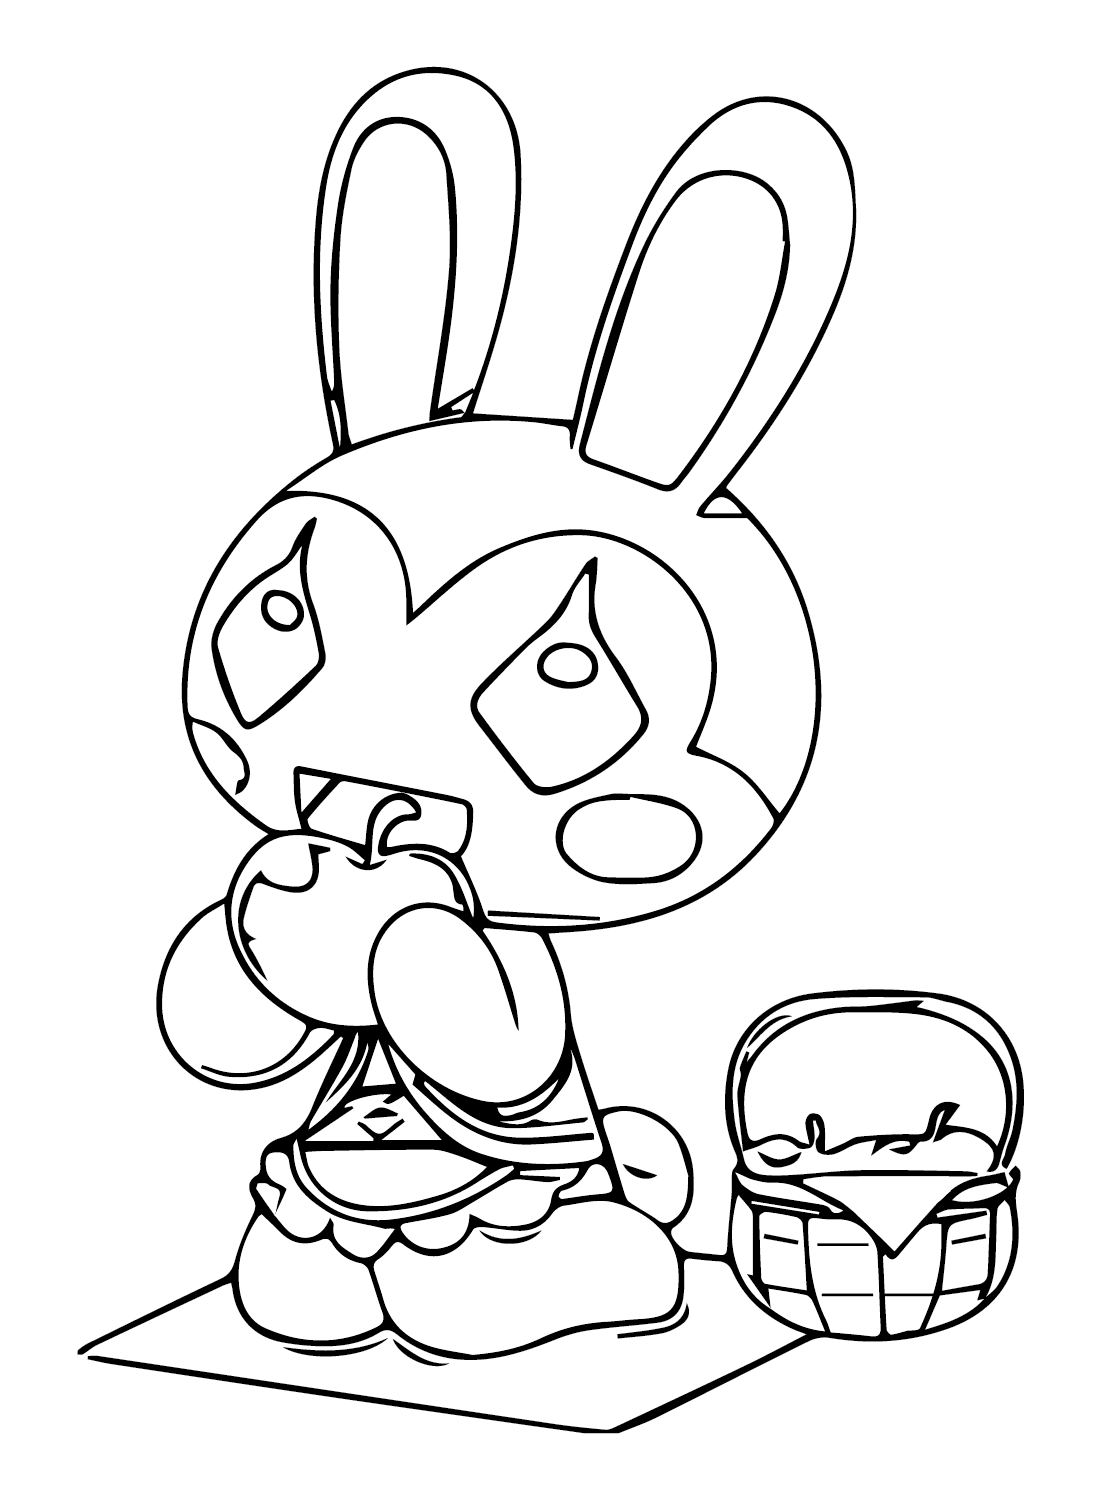 Print Animal Crossing Coloring Page